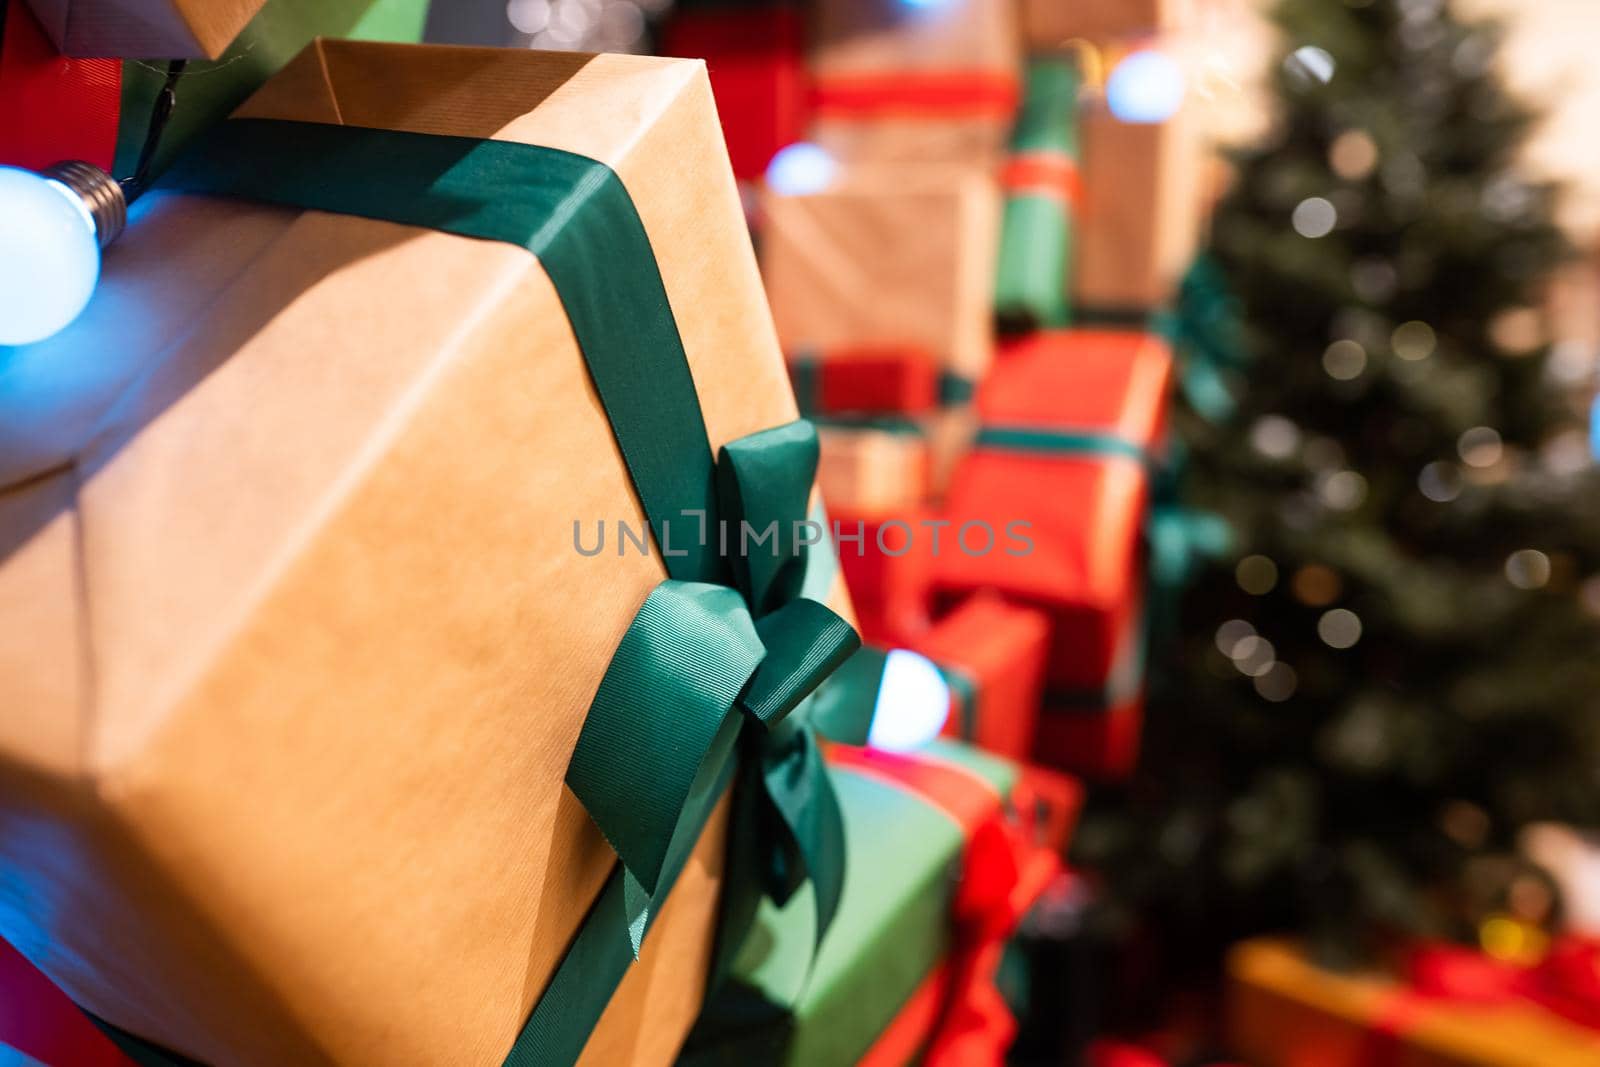 Gift boxes with ribbons of different colors, close angle